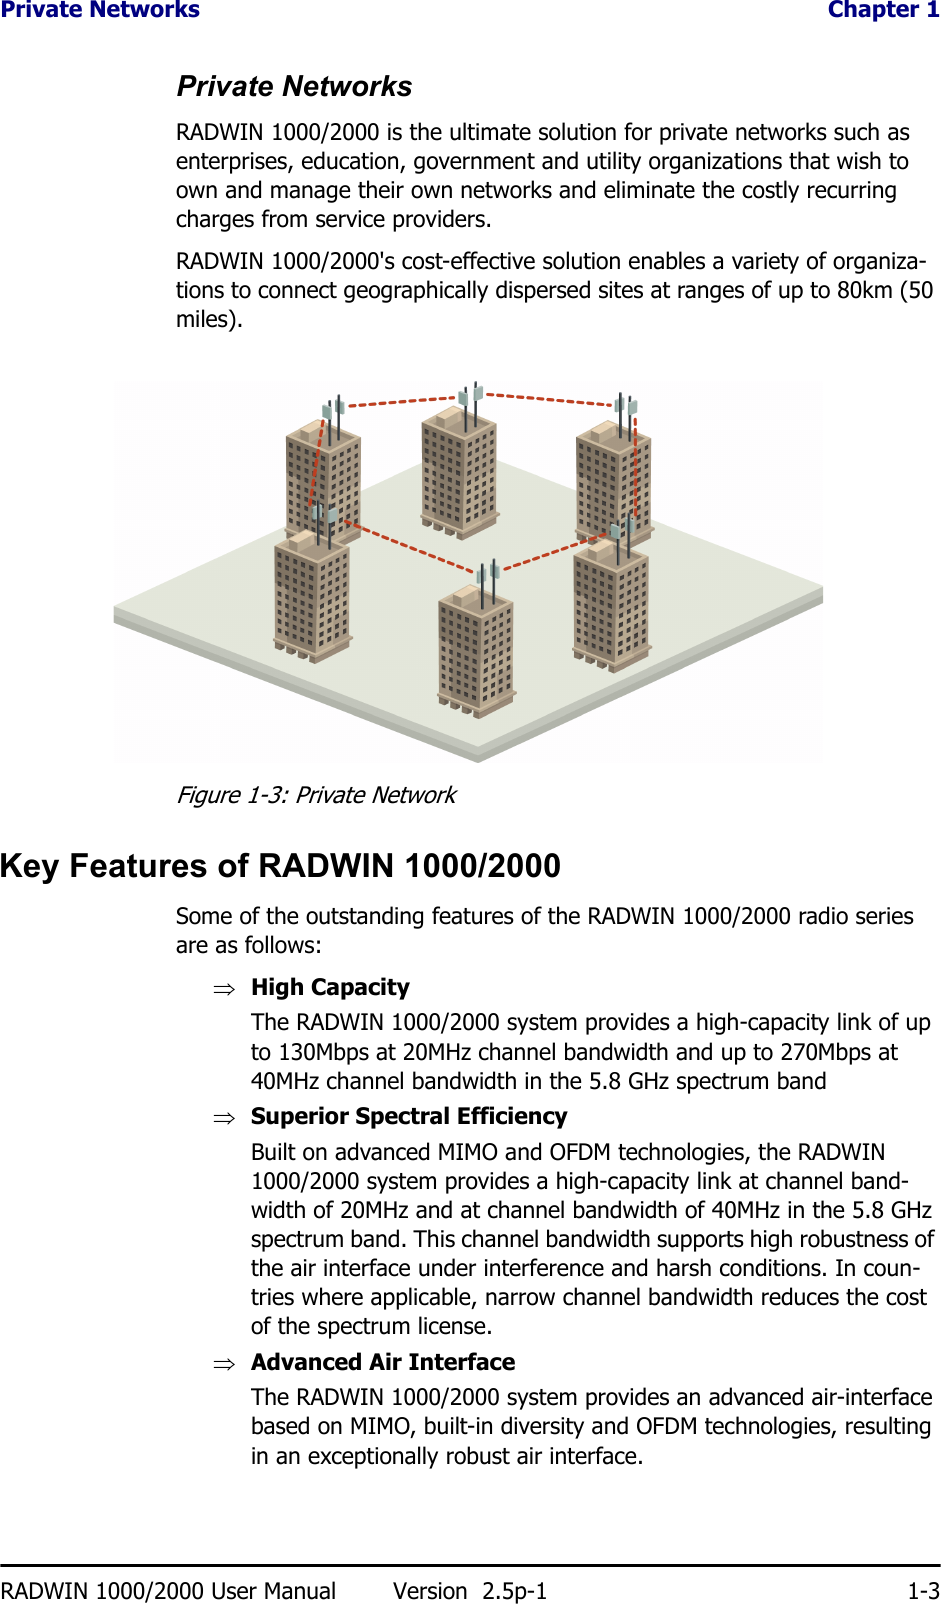 Private Networks  Chapter 1RADWIN 1000/2000 User Manual Version  2.5p-1 1-3Private NetworksRADWIN 1000/2000 is the ultimate solution for private networks such as enterprises, education, government and utility organizations that wish to own and manage their own networks and eliminate the costly recurring charges from service providers.RADWIN 1000/2000&apos;s cost-effective solution enables a variety of organiza-tions to connect geographically dispersed sites at ranges of up to 80km (50 miles).Figure 1-3: Private NetworkKey Features of RADWIN 1000/2000Some of the outstanding features of the RADWIN 1000/2000 radio series are as follows:⇒High CapacityThe RADWIN 1000/2000 system provides a high-capacity link of up to 130Mbps at 20MHz channel bandwidth and up to 270Mbps at 40MHz channel bandwidth in the 5.8 GHz spectrum band⇒Superior Spectral EfficiencyBuilt on advanced MIMO and OFDM technologies, the RADWIN 1000/2000 system provides a high-capacity link at channel band-width of 20MHz and at channel bandwidth of 40MHz in the 5.8 GHz spectrum band. This channel bandwidth supports high robustness of the air interface under interference and harsh conditions. In coun-tries where applicable, narrow channel bandwidth reduces the cost of the spectrum license.⇒Advanced Air InterfaceThe RADWIN 1000/2000 system provides an advanced air-interface based on MIMO, built-in diversity and OFDM technologies, resulting in an exceptionally robust air interface. 